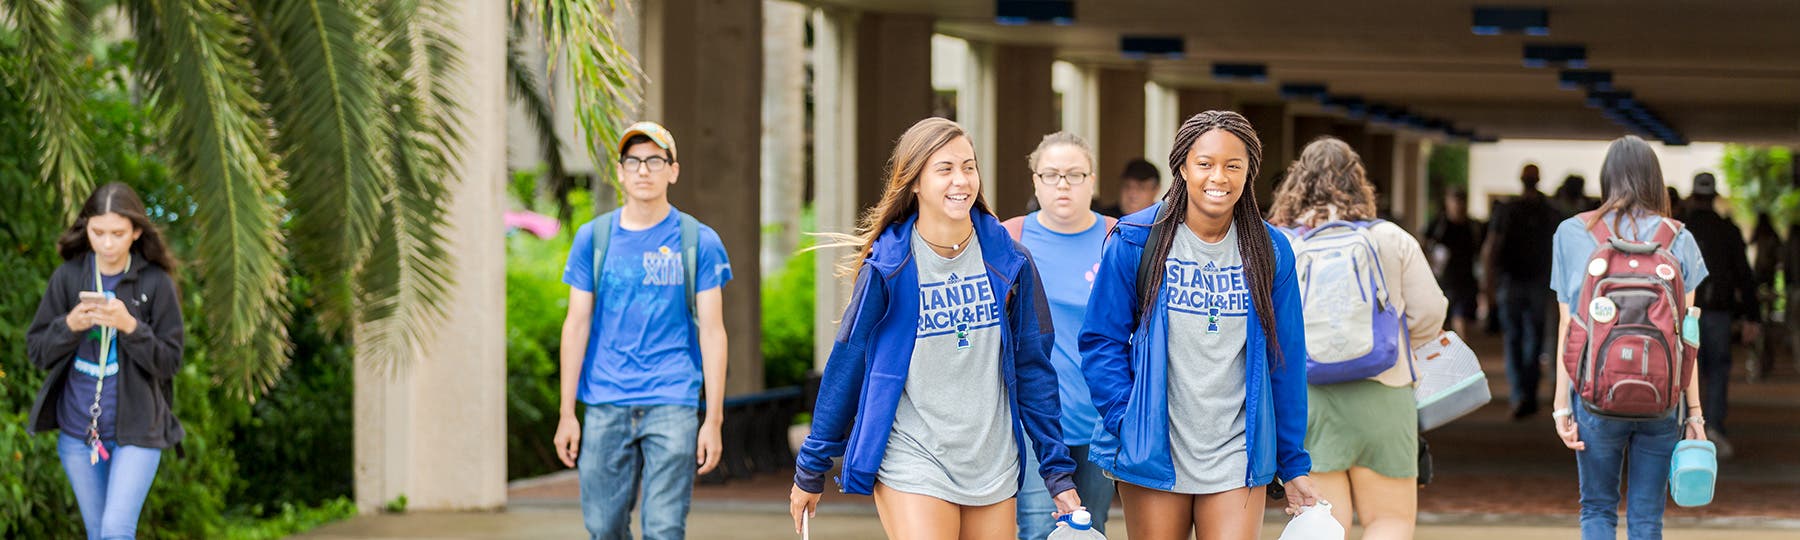 Students walking together wearing track uniforms